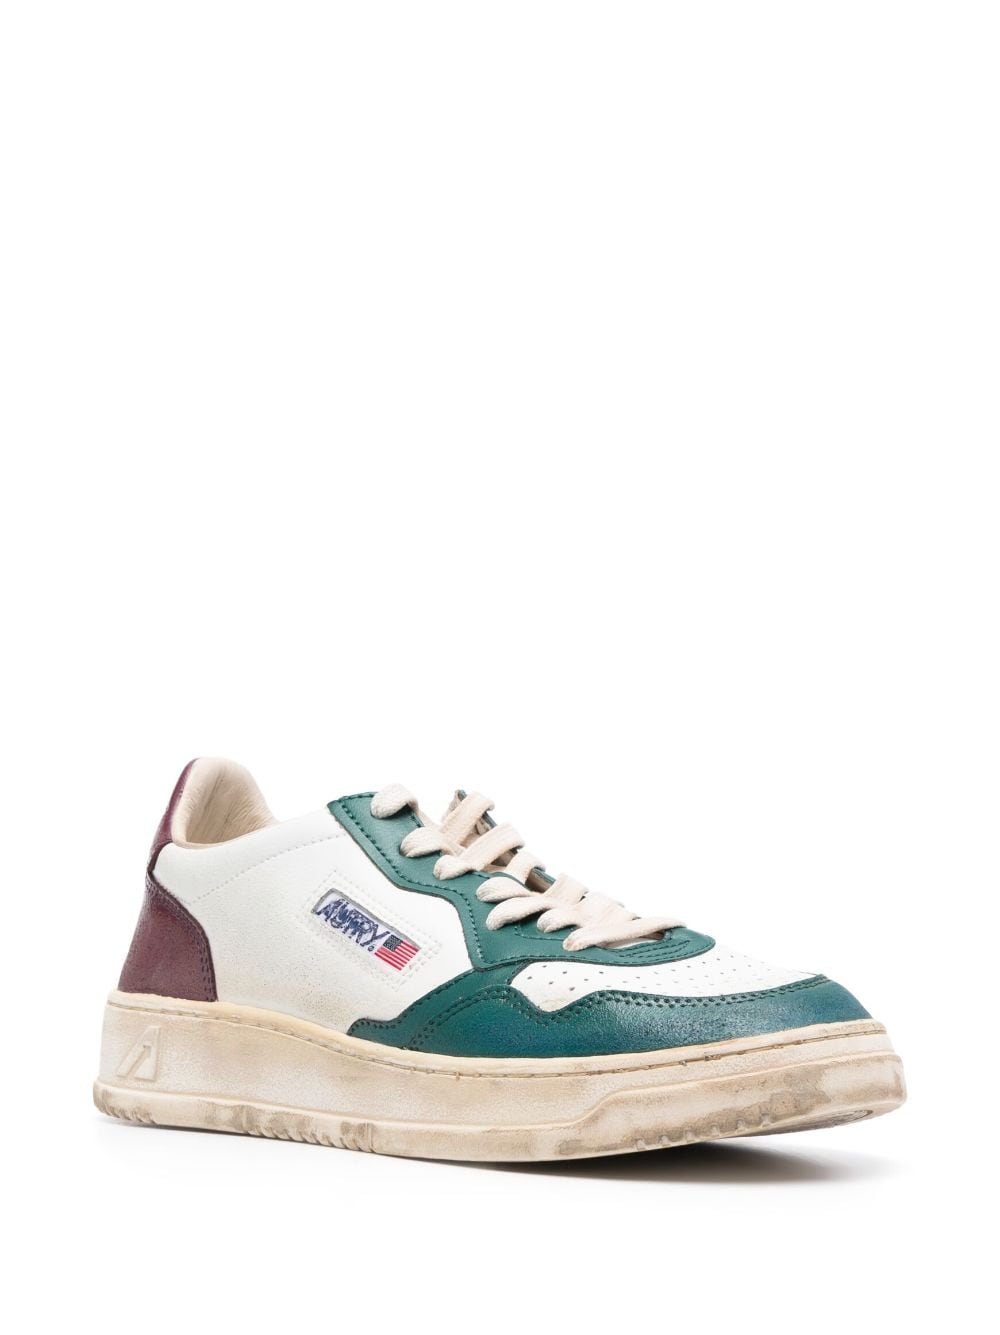 supervintage white green and burgundy sneaker